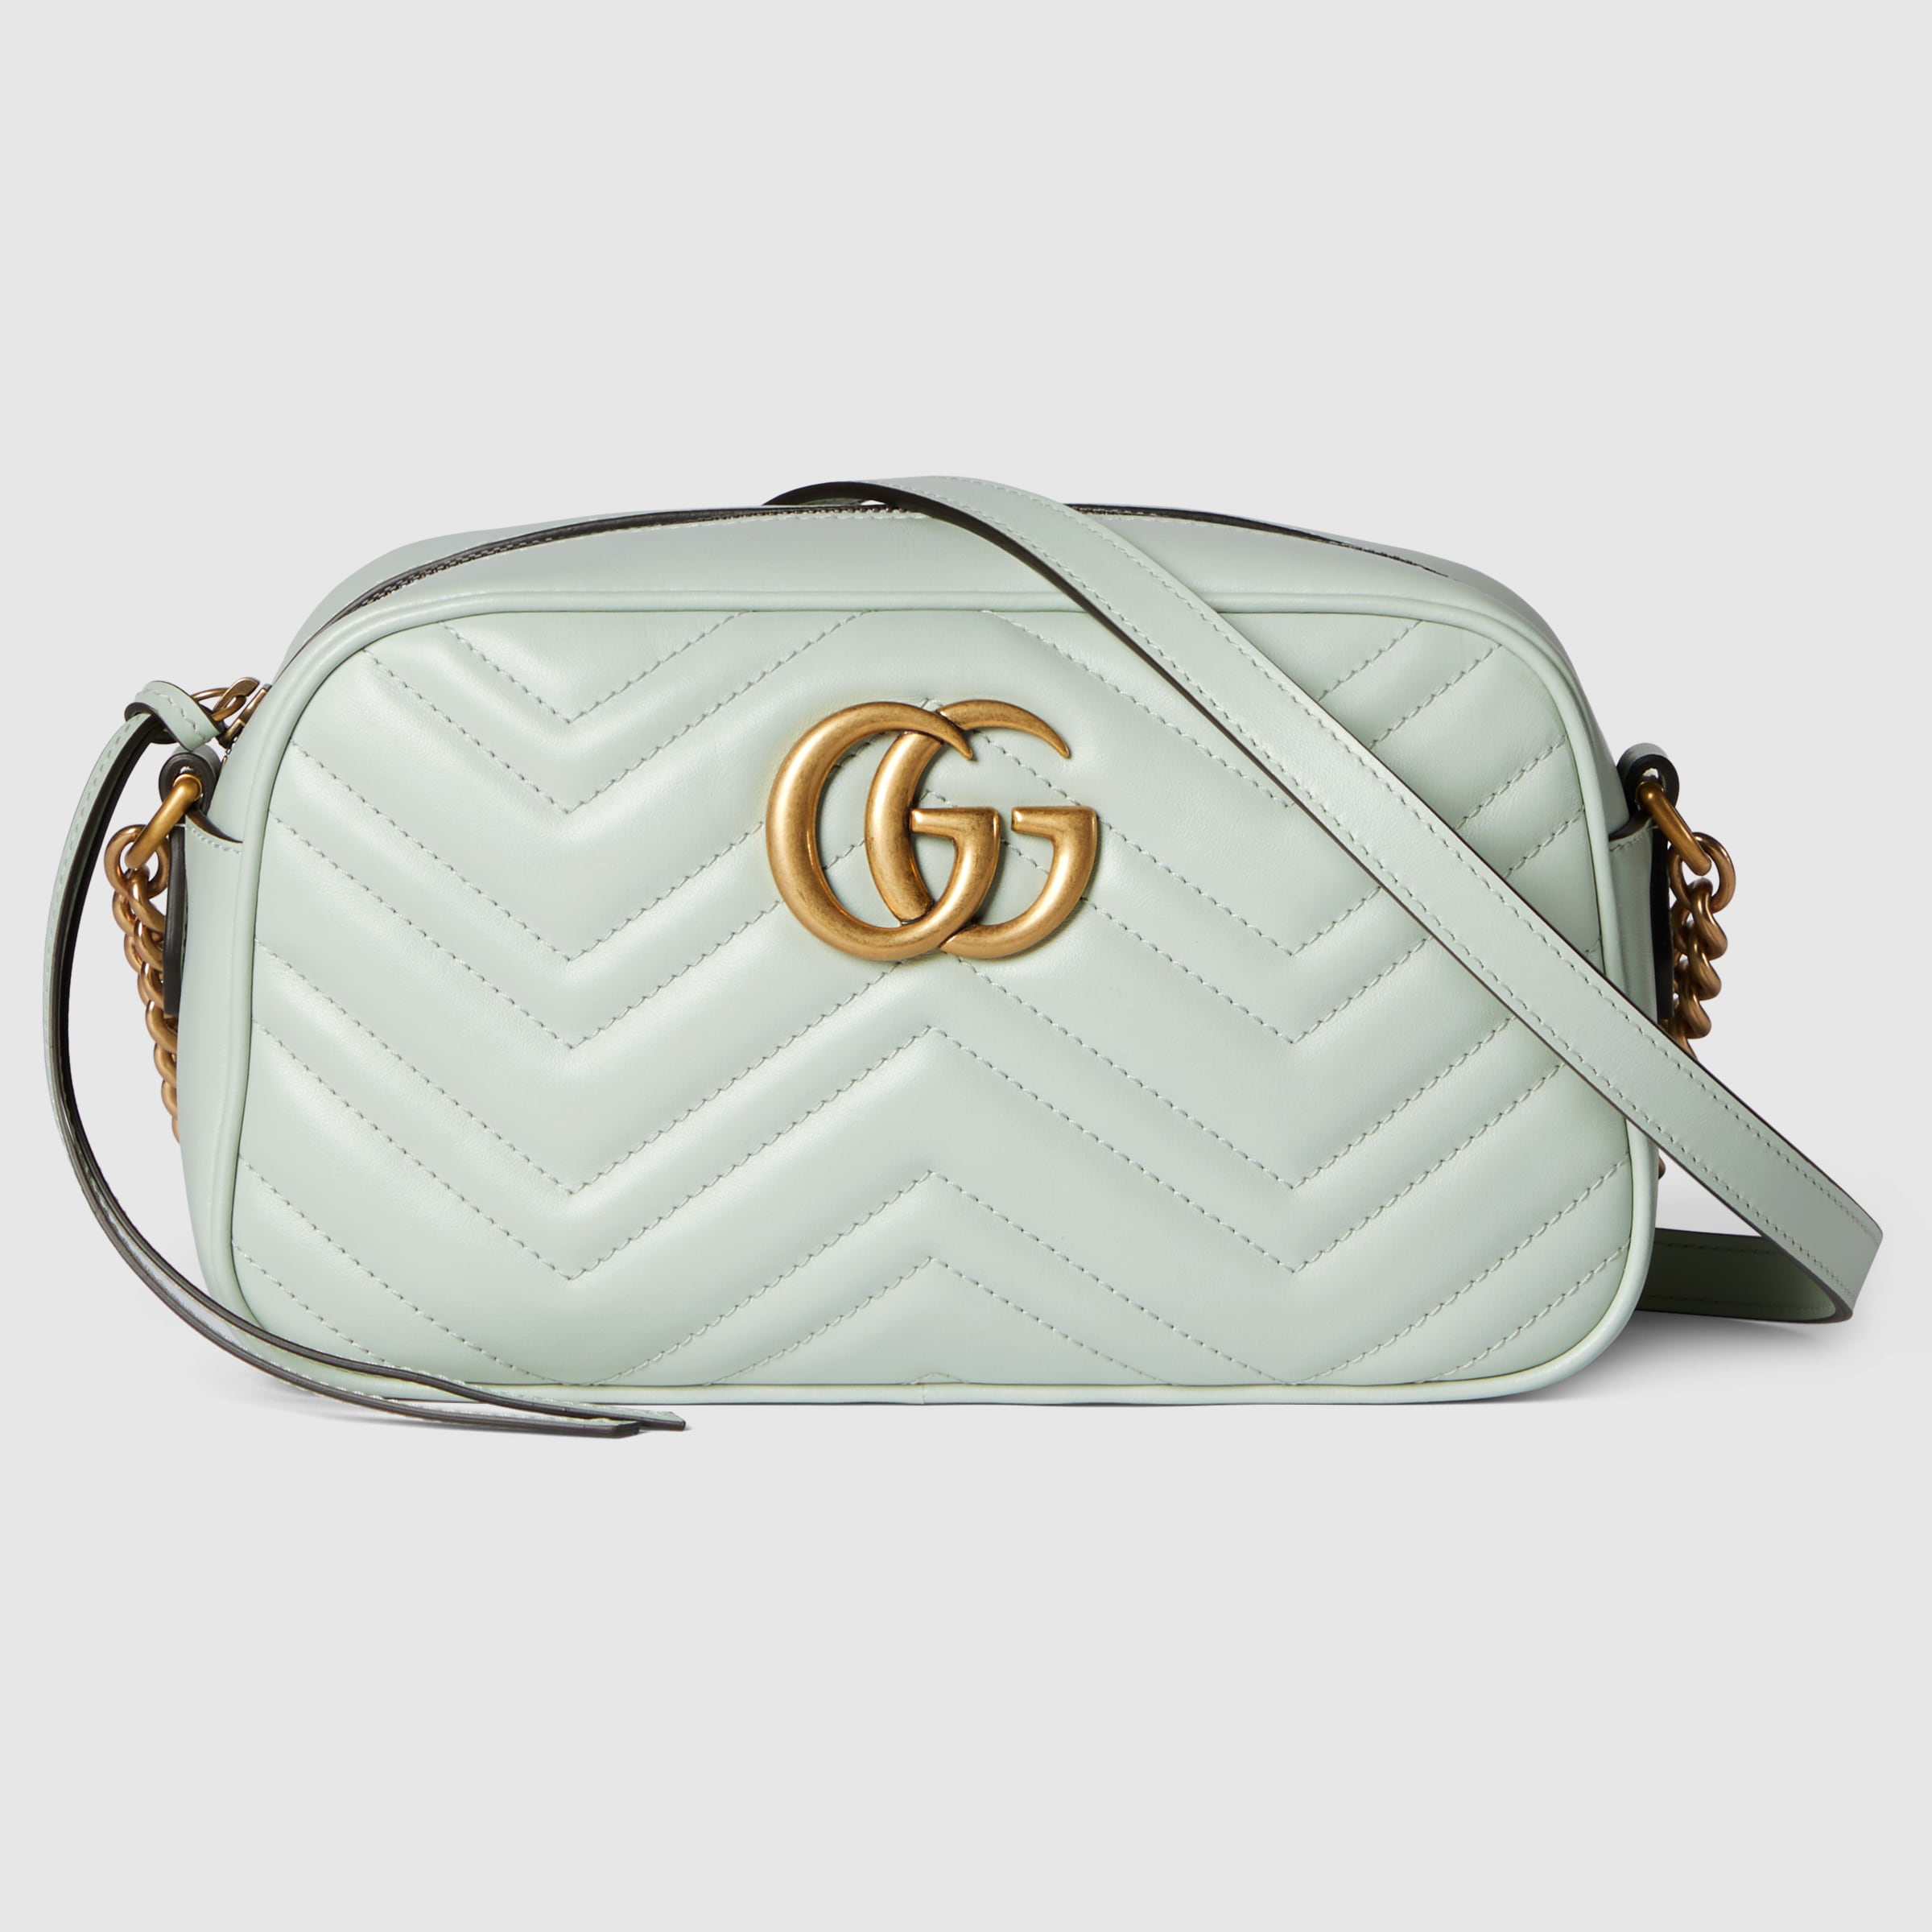 Gg marmont small shoulder bag